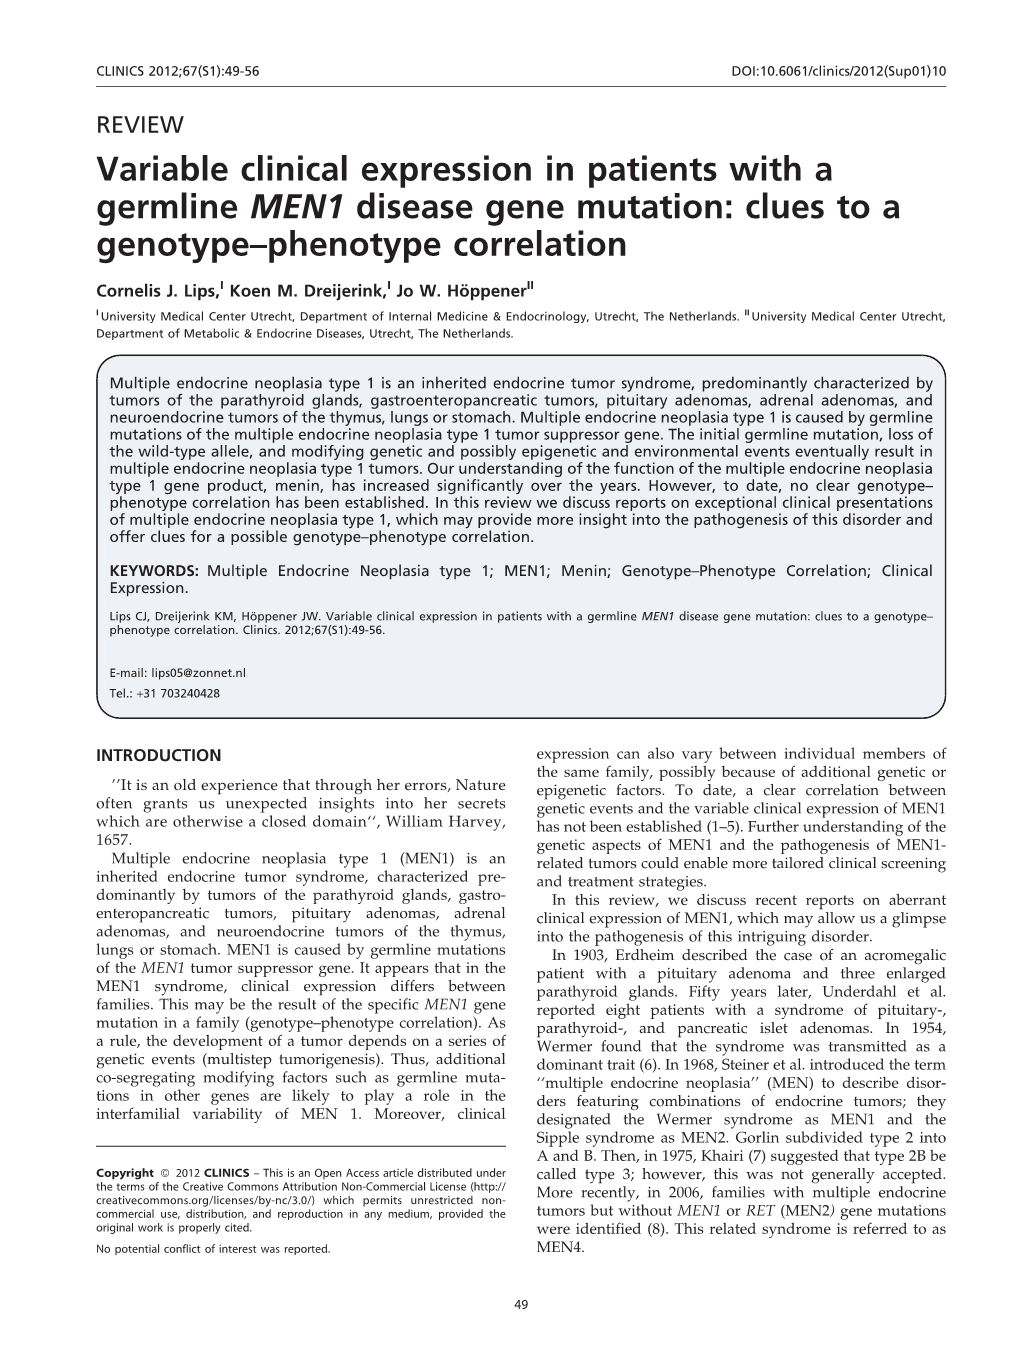 Variable Clinical Expression in Patients with a Germline MEN1 Disease Gene Mutation: Clues to a Genotype–Phenotype Correlation